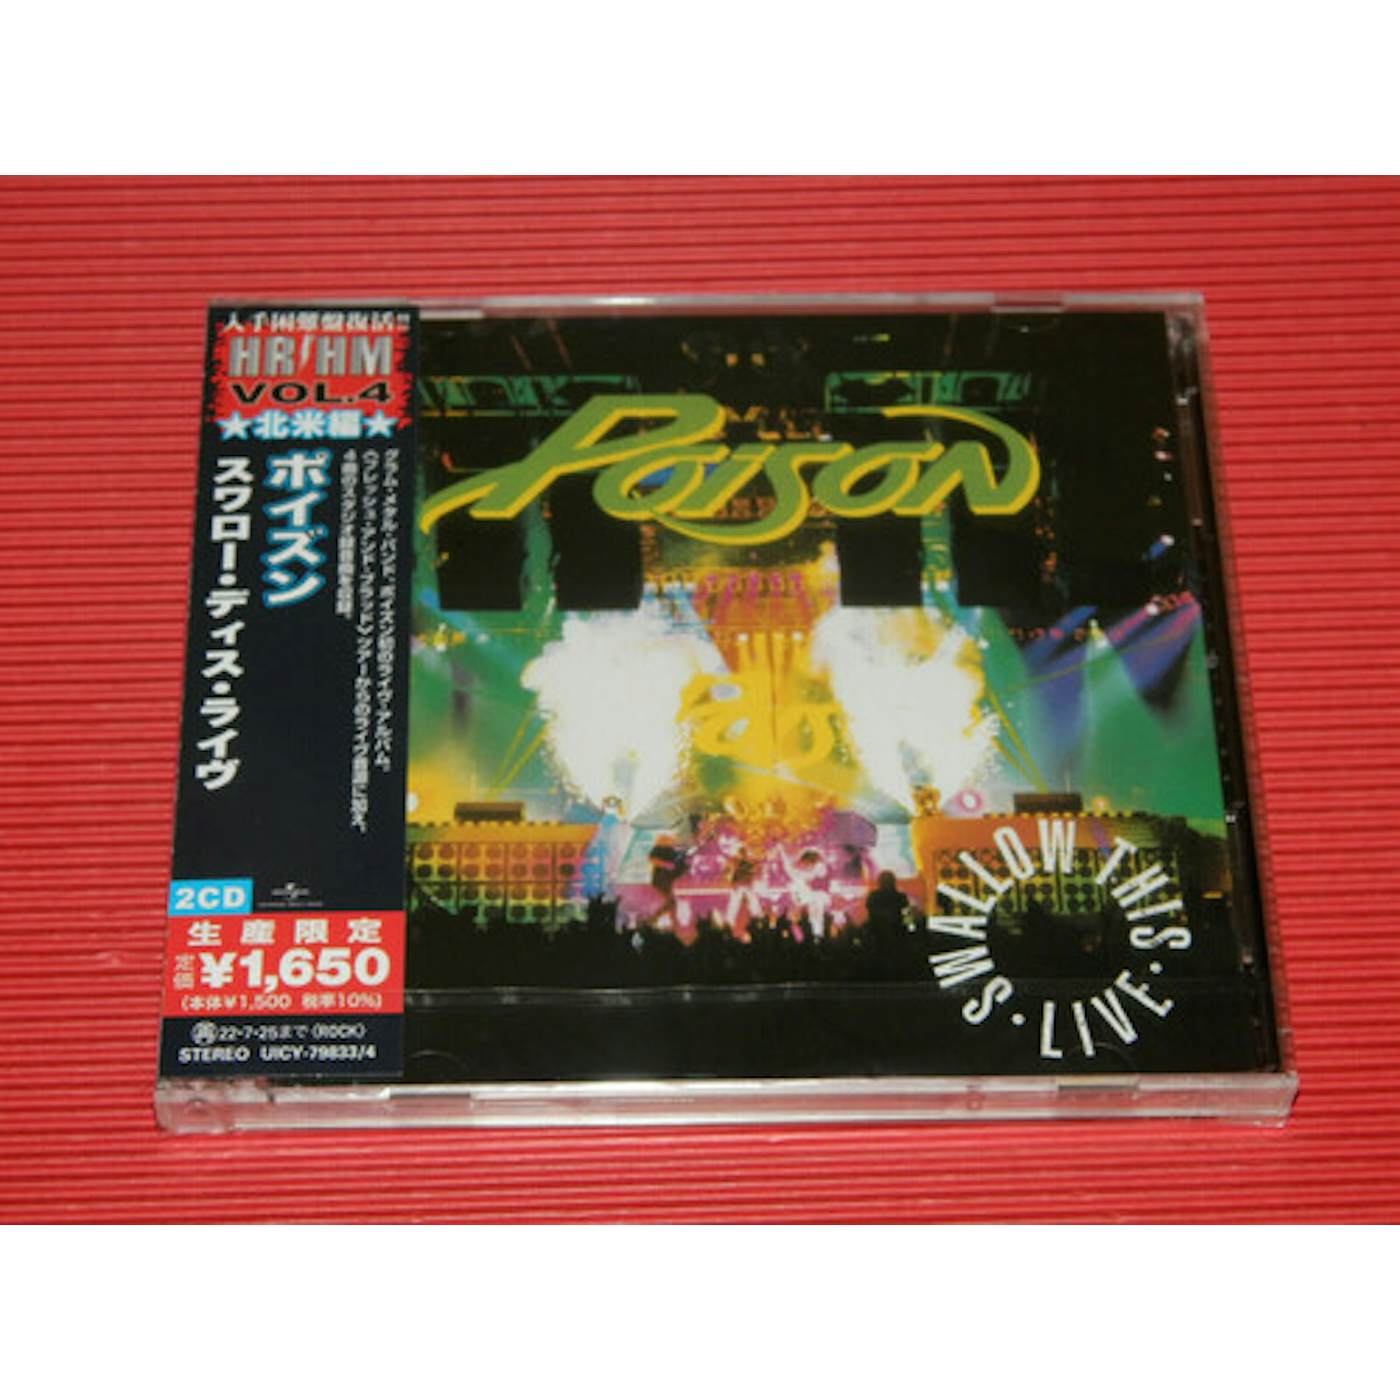 Poison SWALLOW THIS LIVE CD